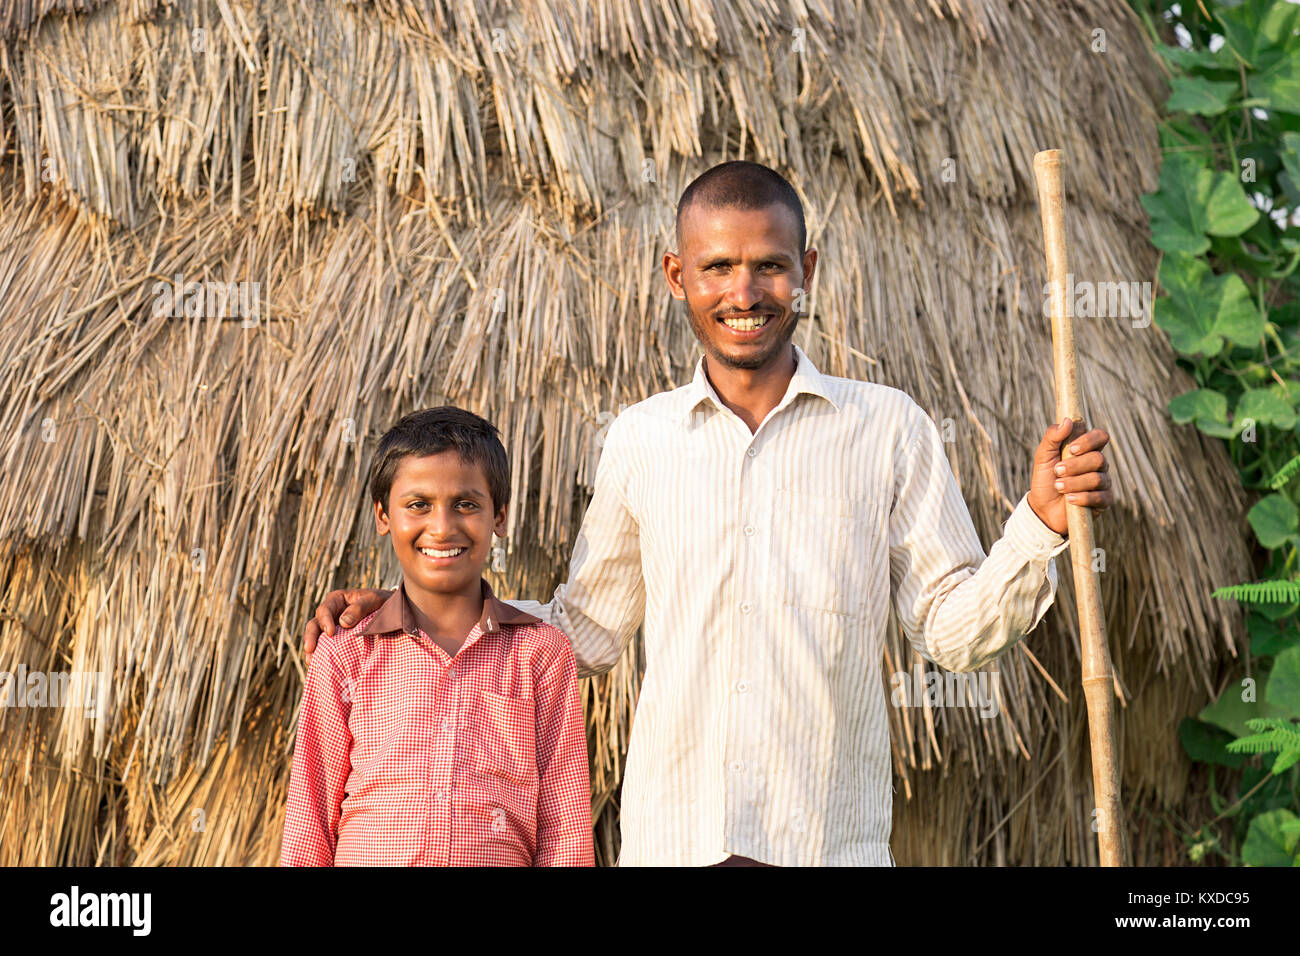 2 Indian Rural Farmer Father And Son Standing Field Husk Stock Photo